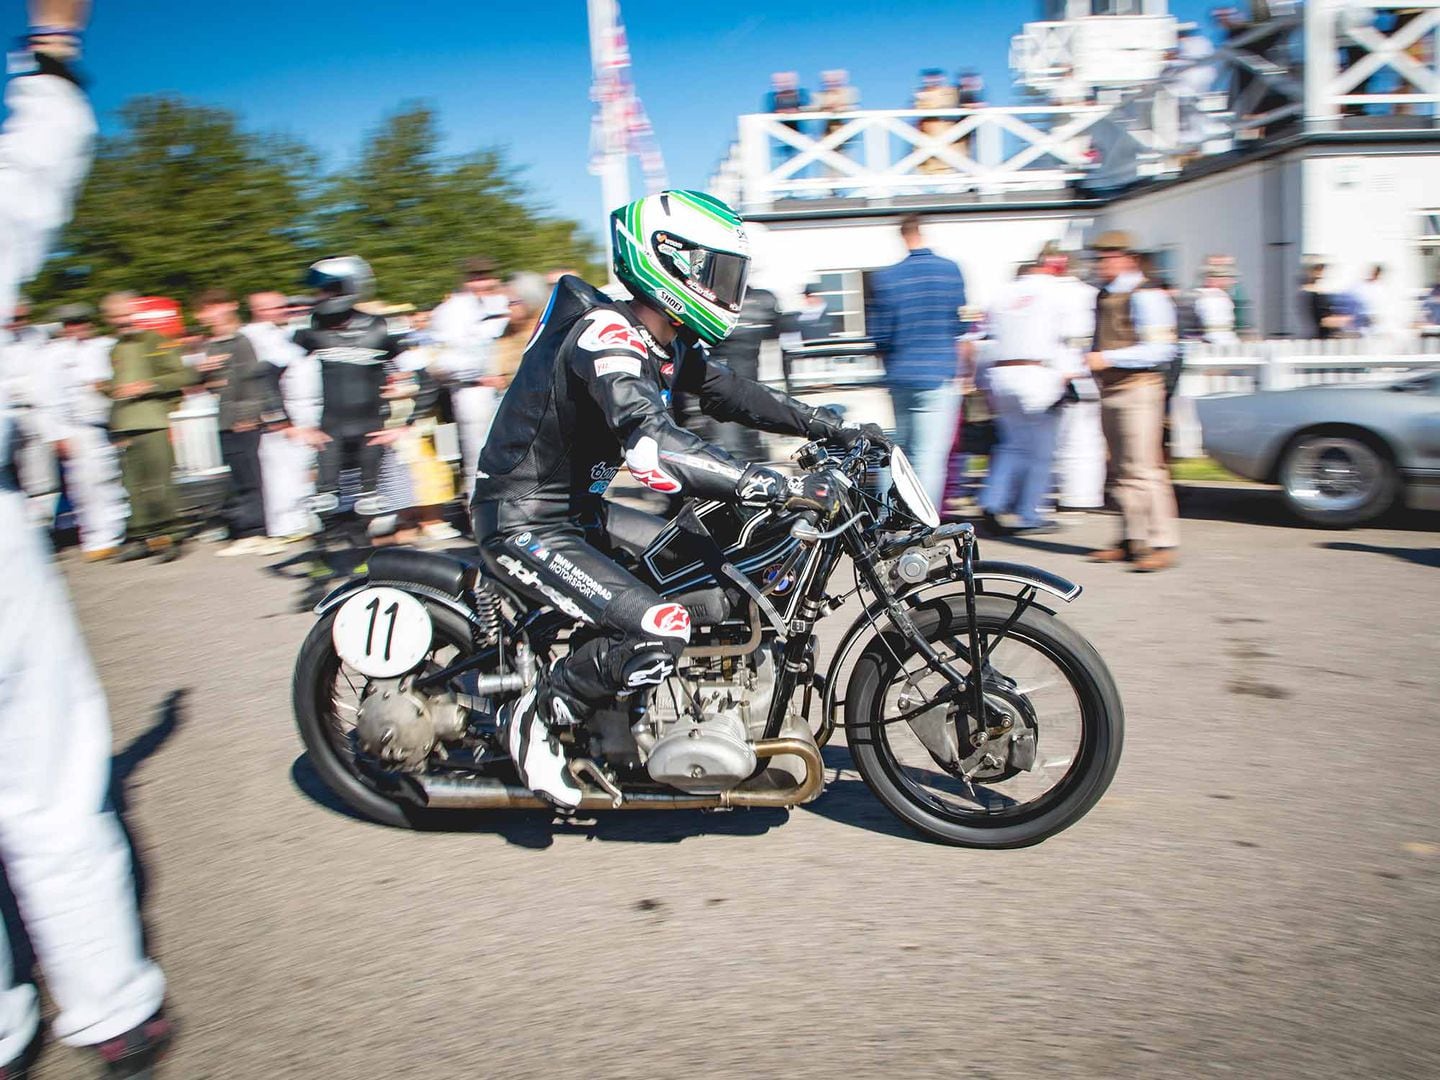 The Goodwood Revival Experience